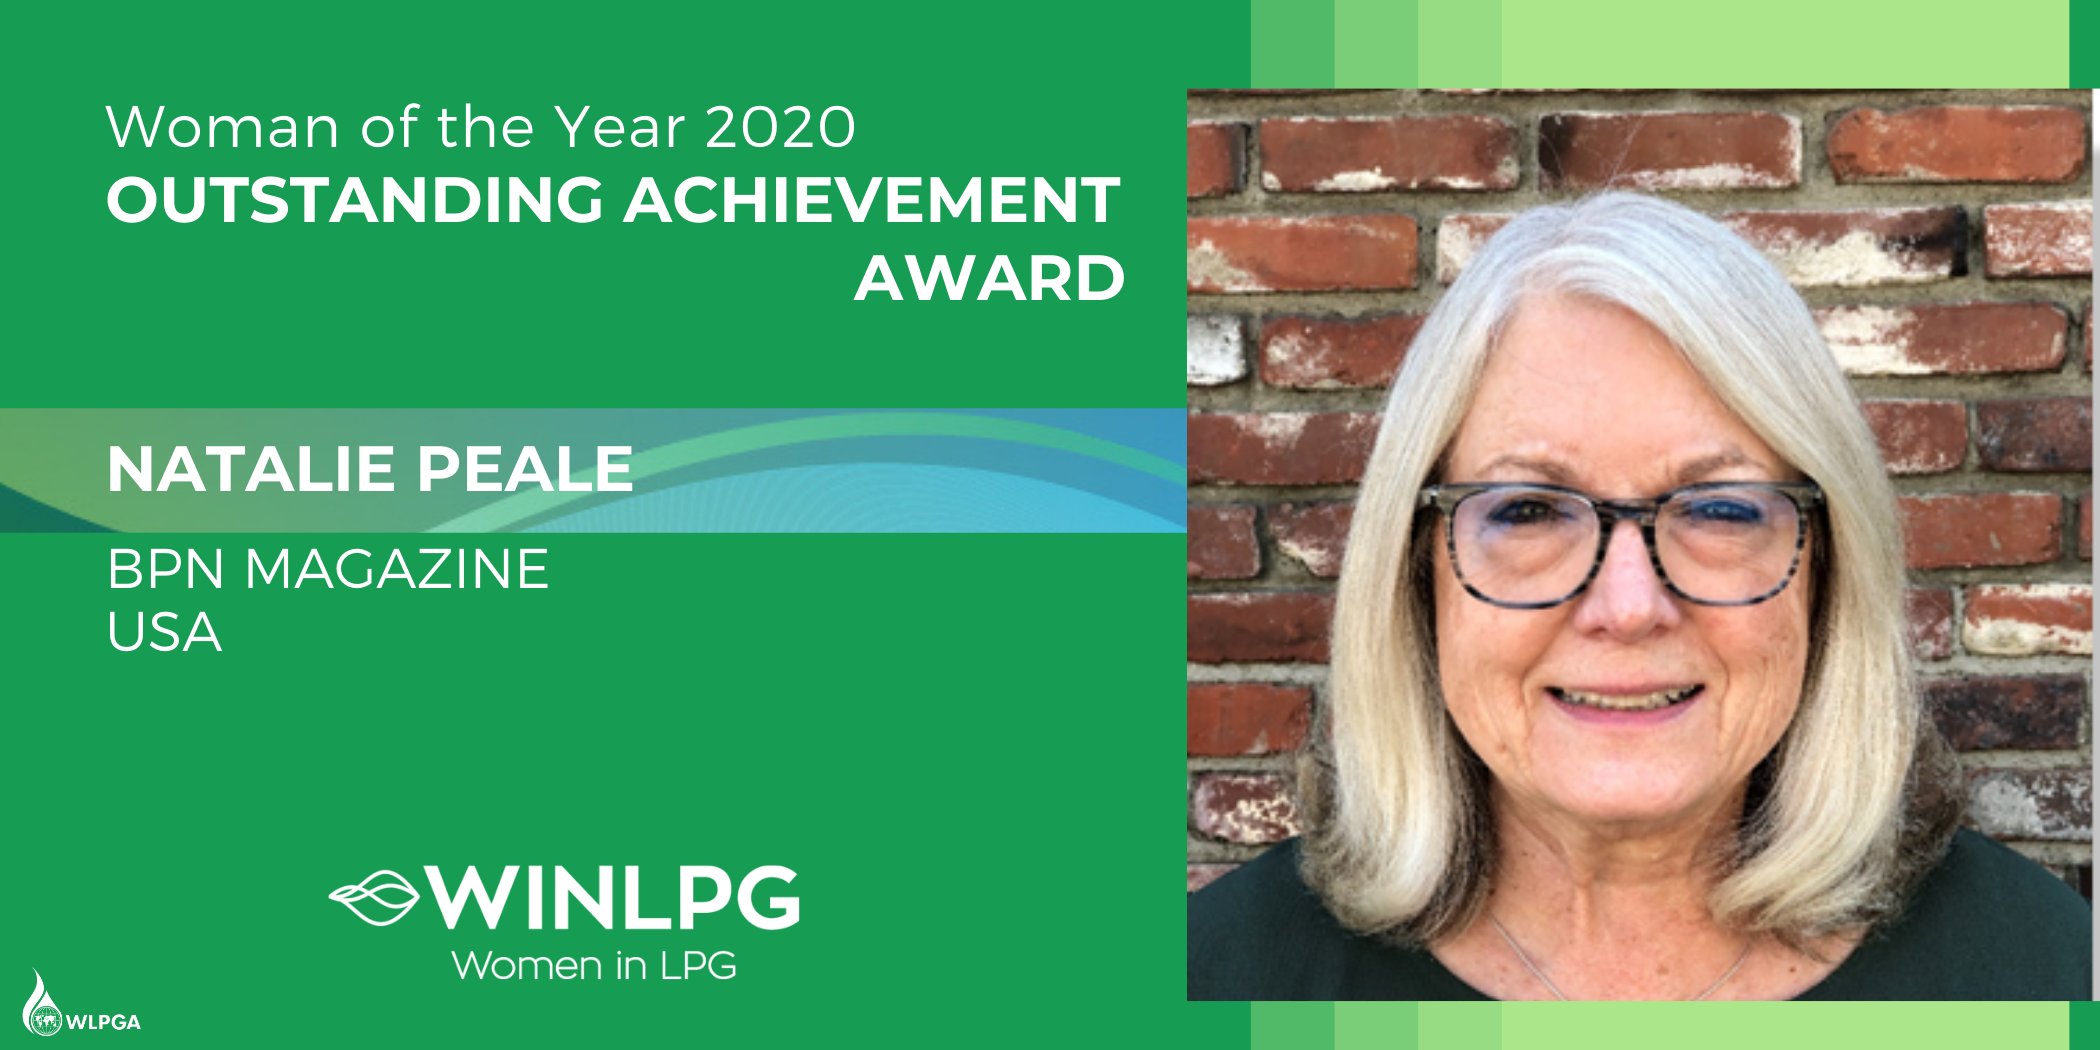 WLPGA Propane Woman of Year Award outstanding achievement goes to Bpn publisher Natalie Peal 2020